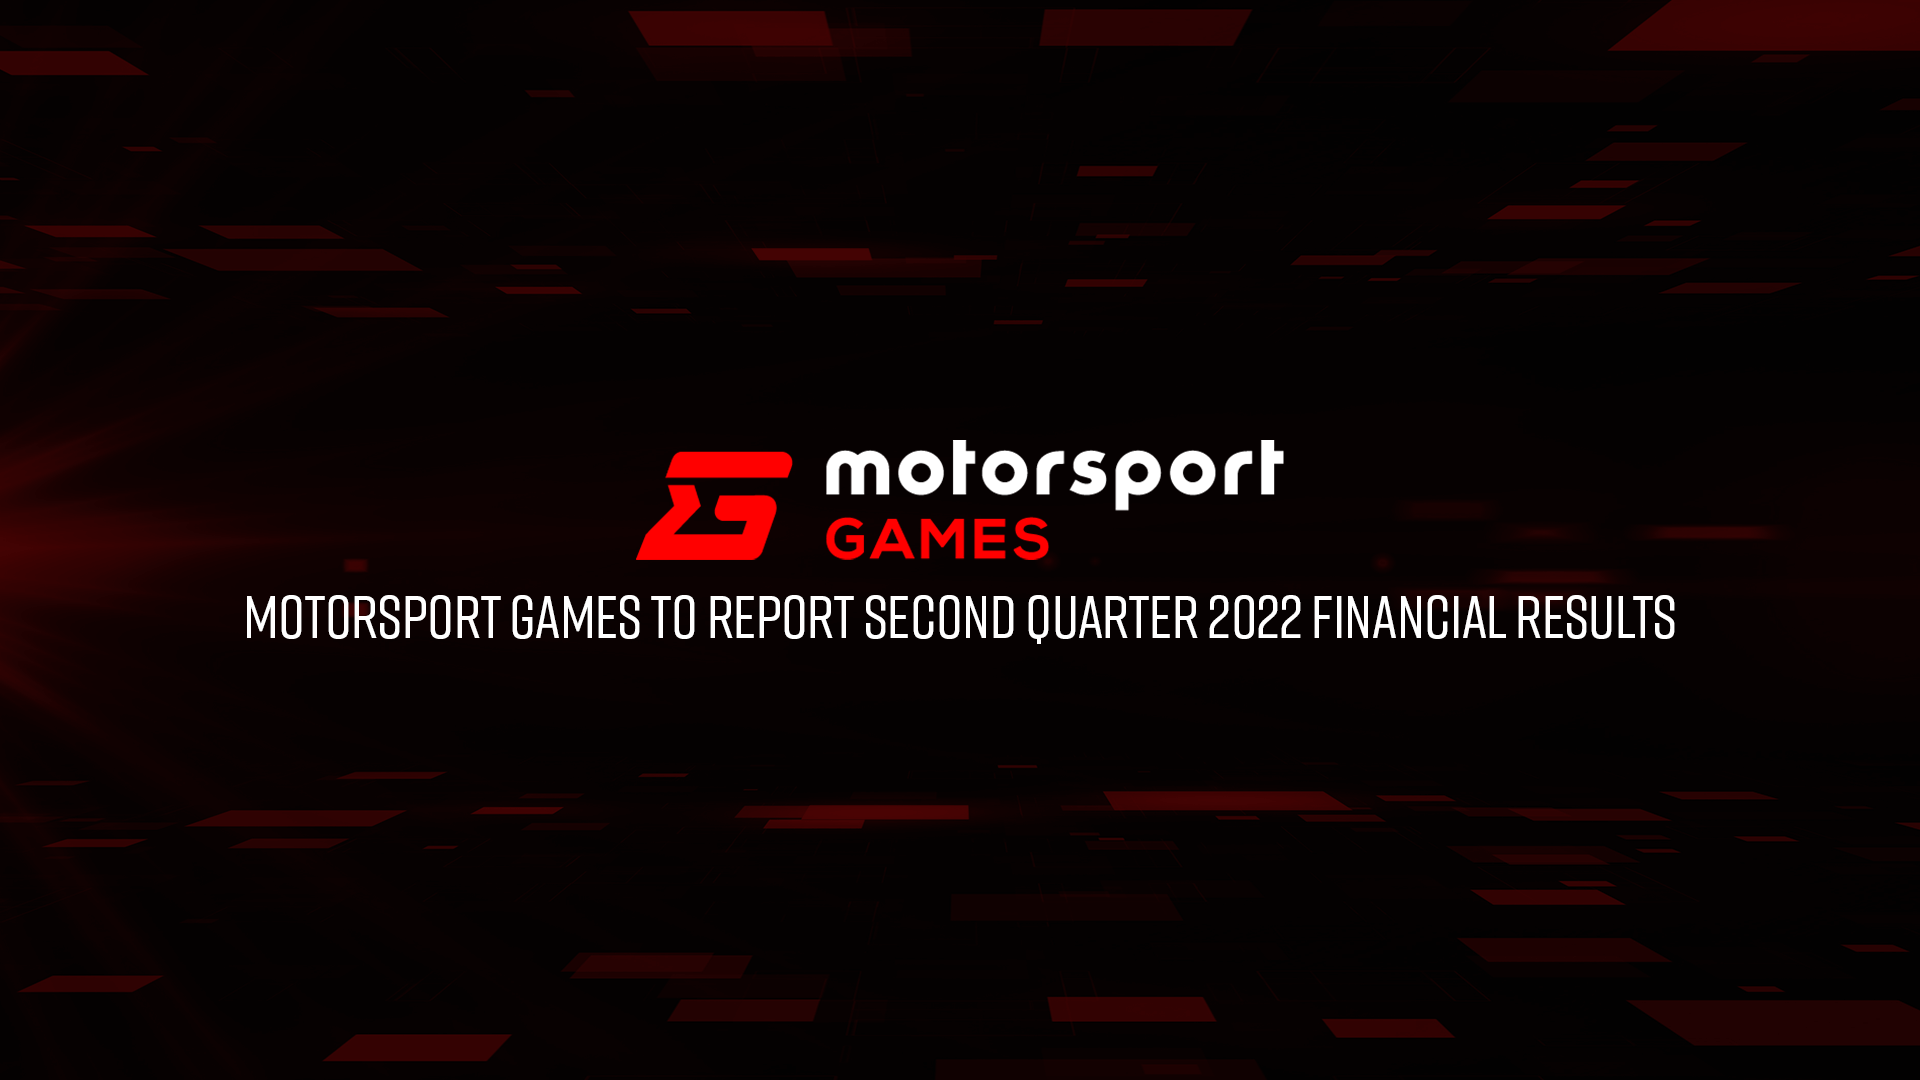 Motorsport Games to Report Q2 2022 Earnings